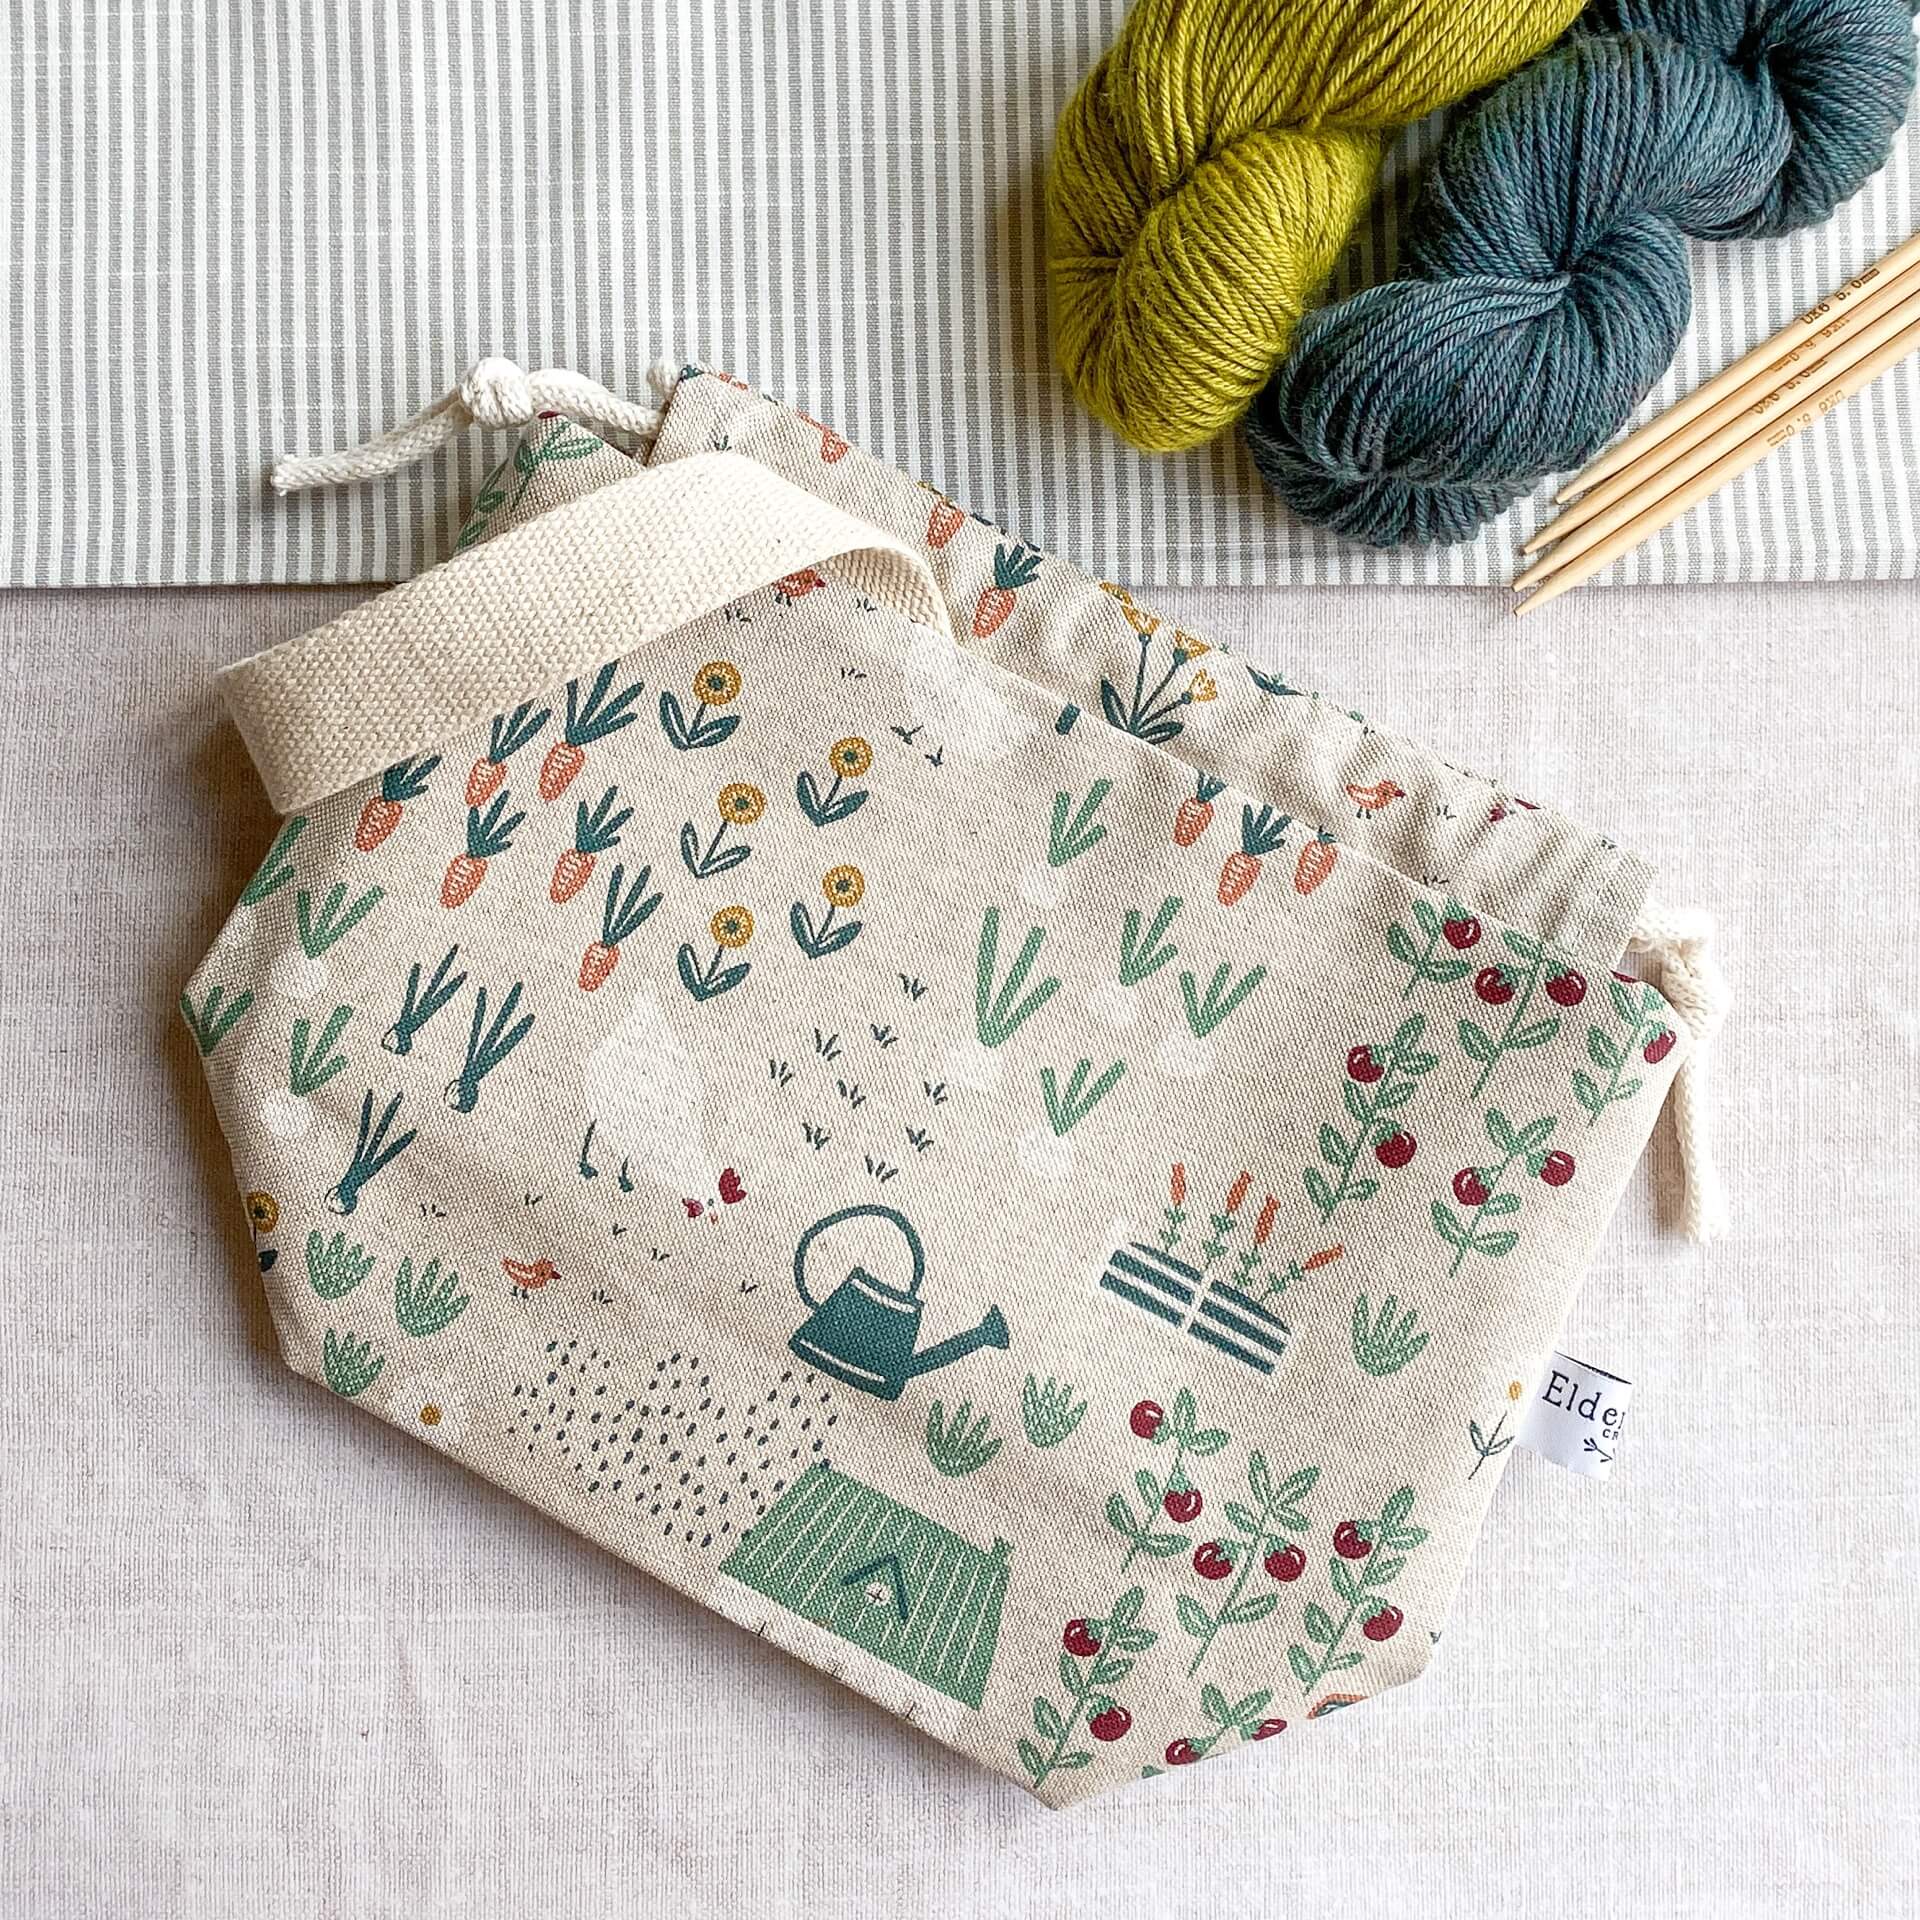 A bag showing images of chickens and flowers and vegetables in a whimsical style is lying on a table top. Just in shot are two skeins of yarn, one green and one blue, alongside four wooden knitting needles. 